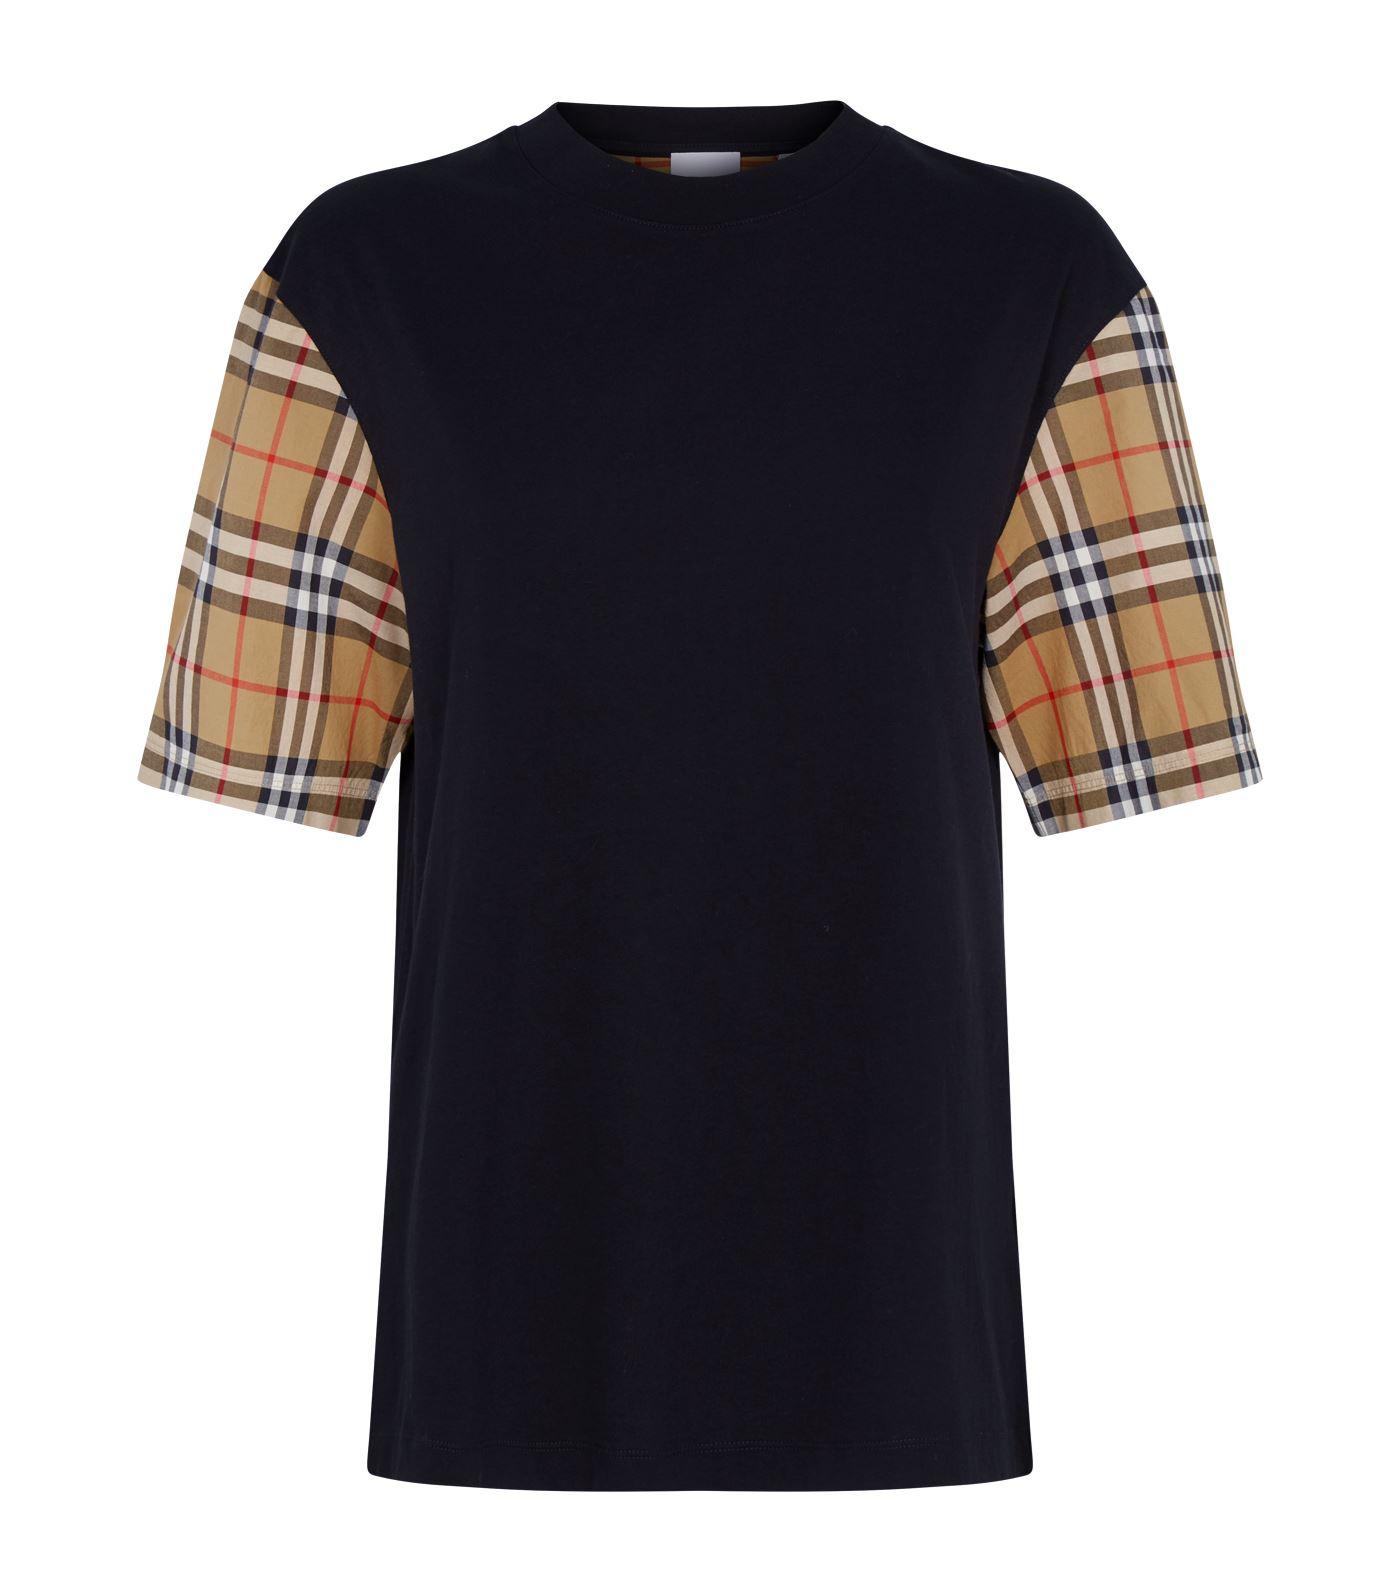 Burberry Cotton Vintage Check T-shirt in Black - Save 30% - Lyst